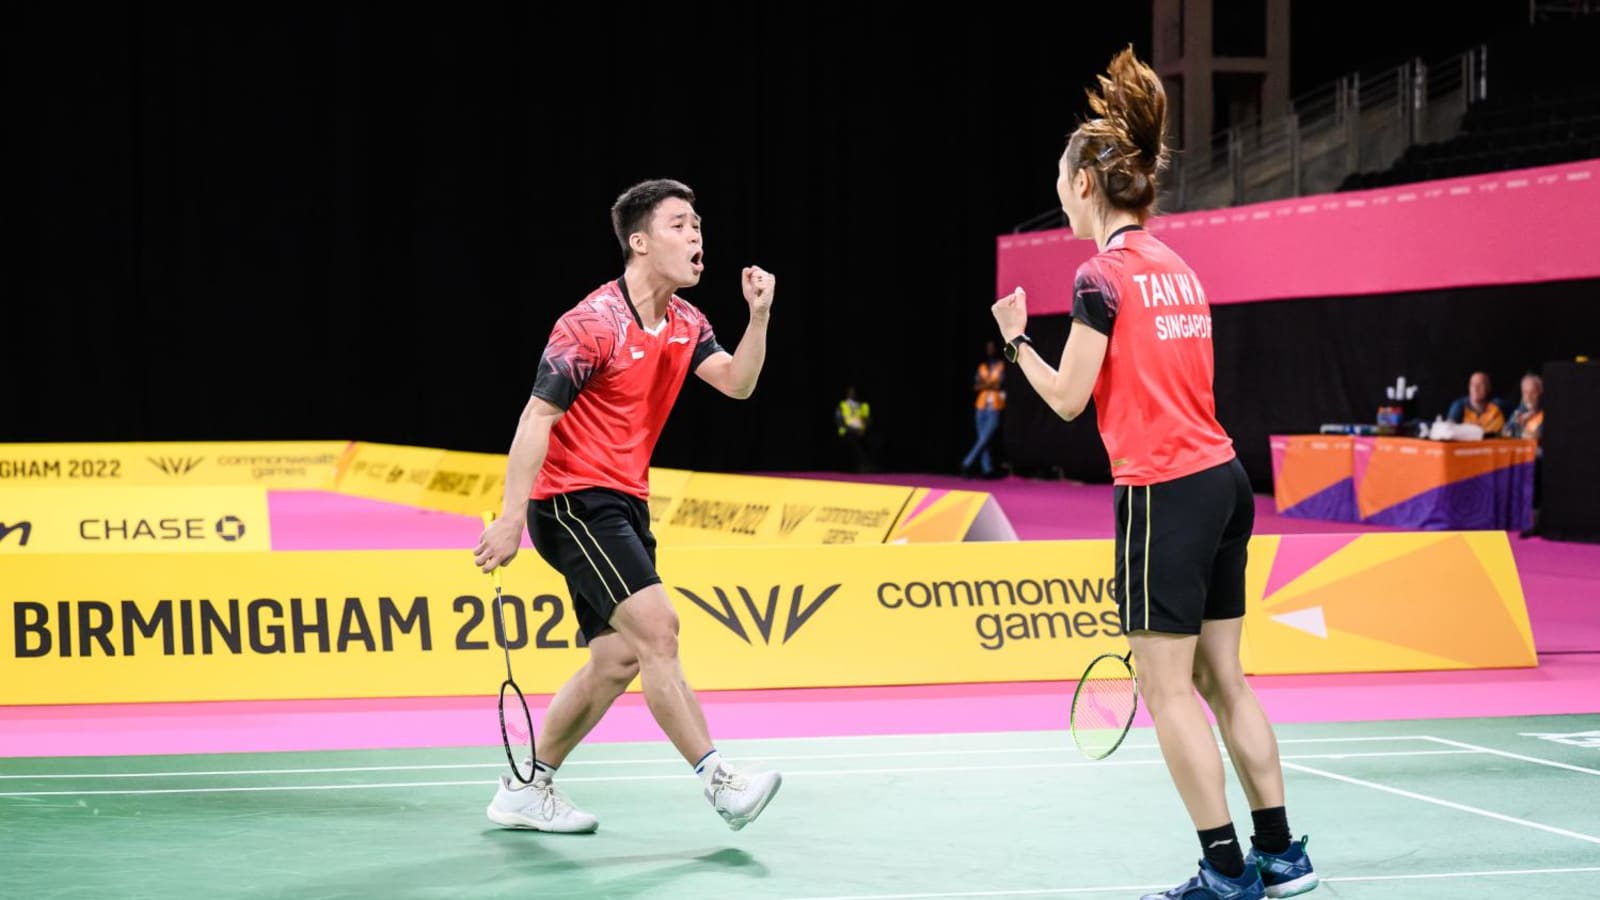 singapore’s-jessica-tan,-terry-hee-book-place-in-commonwealth-games-badminton-mixed-doubles-final